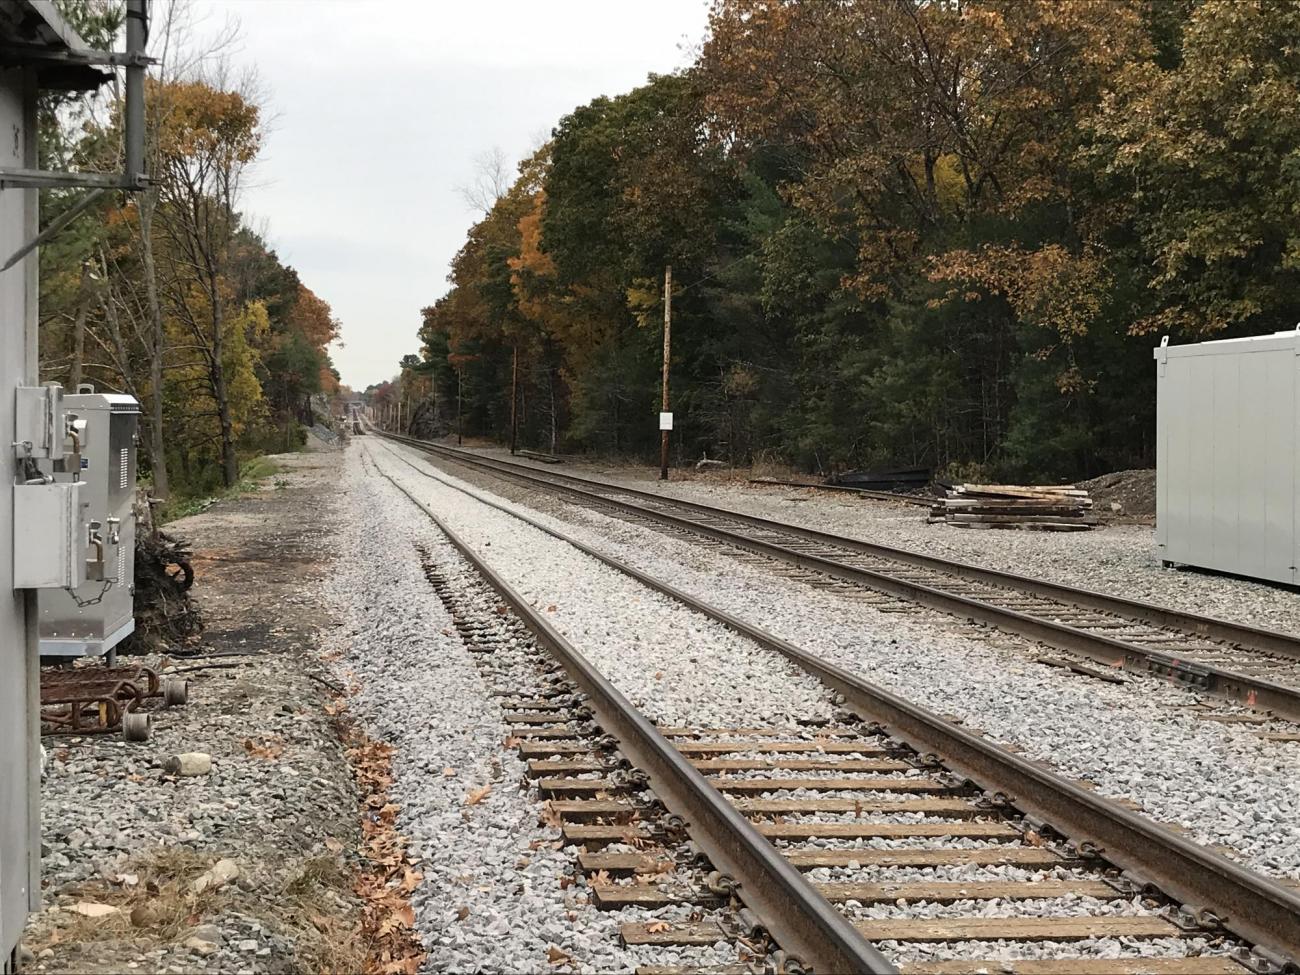 Stone ballast was placed on the tracks before being leveled out by the tamping machine (October 2019)